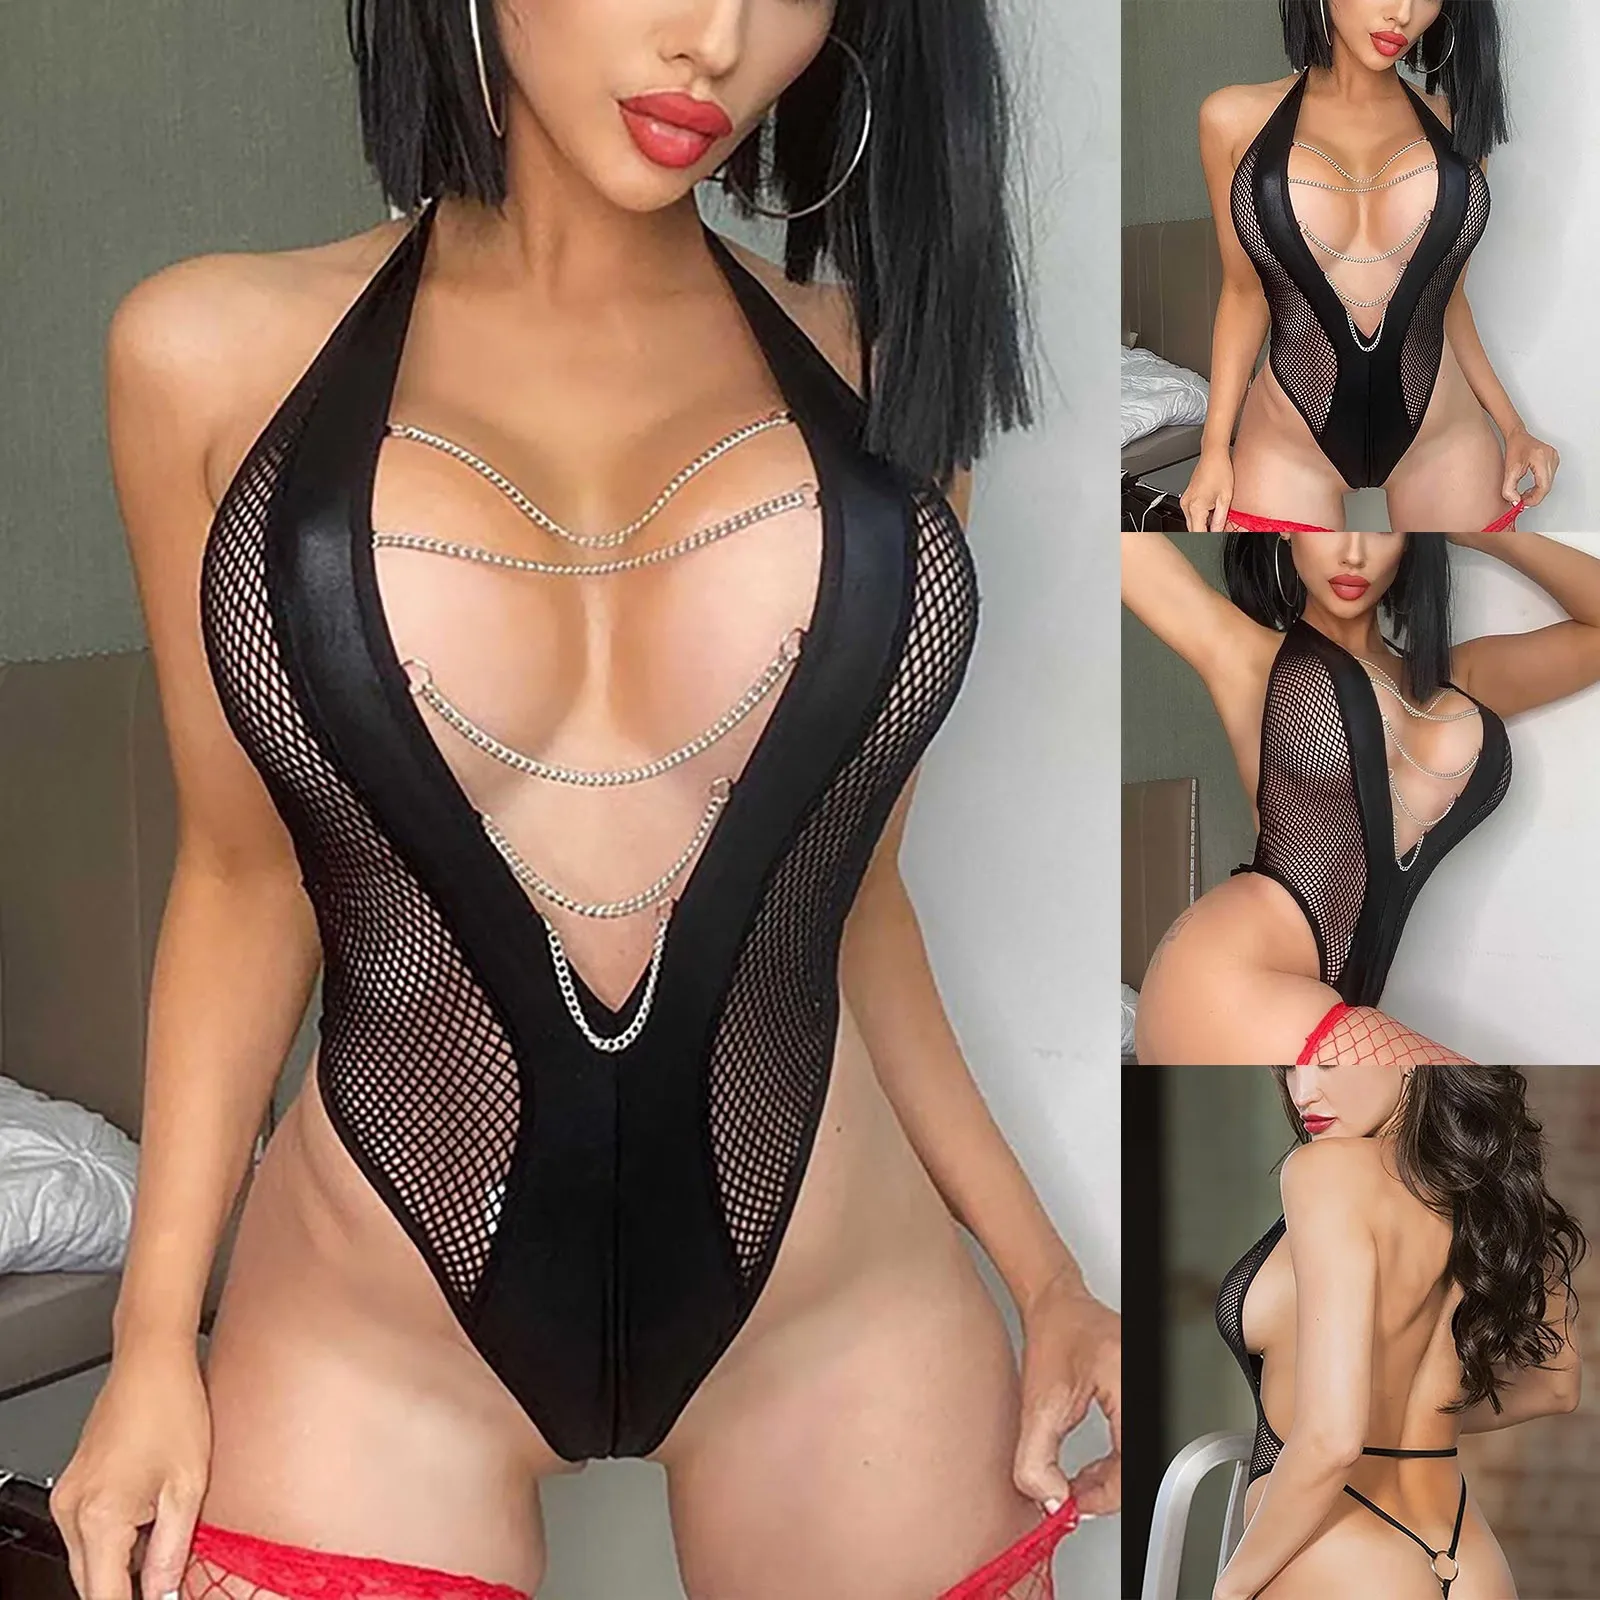 Women-s-Sexy-Lingerie-One-Piece-Hollow-Out-Halter-Backless-Tight-Deep-V-Mesh-Perspective-Bodysuit.jpg_